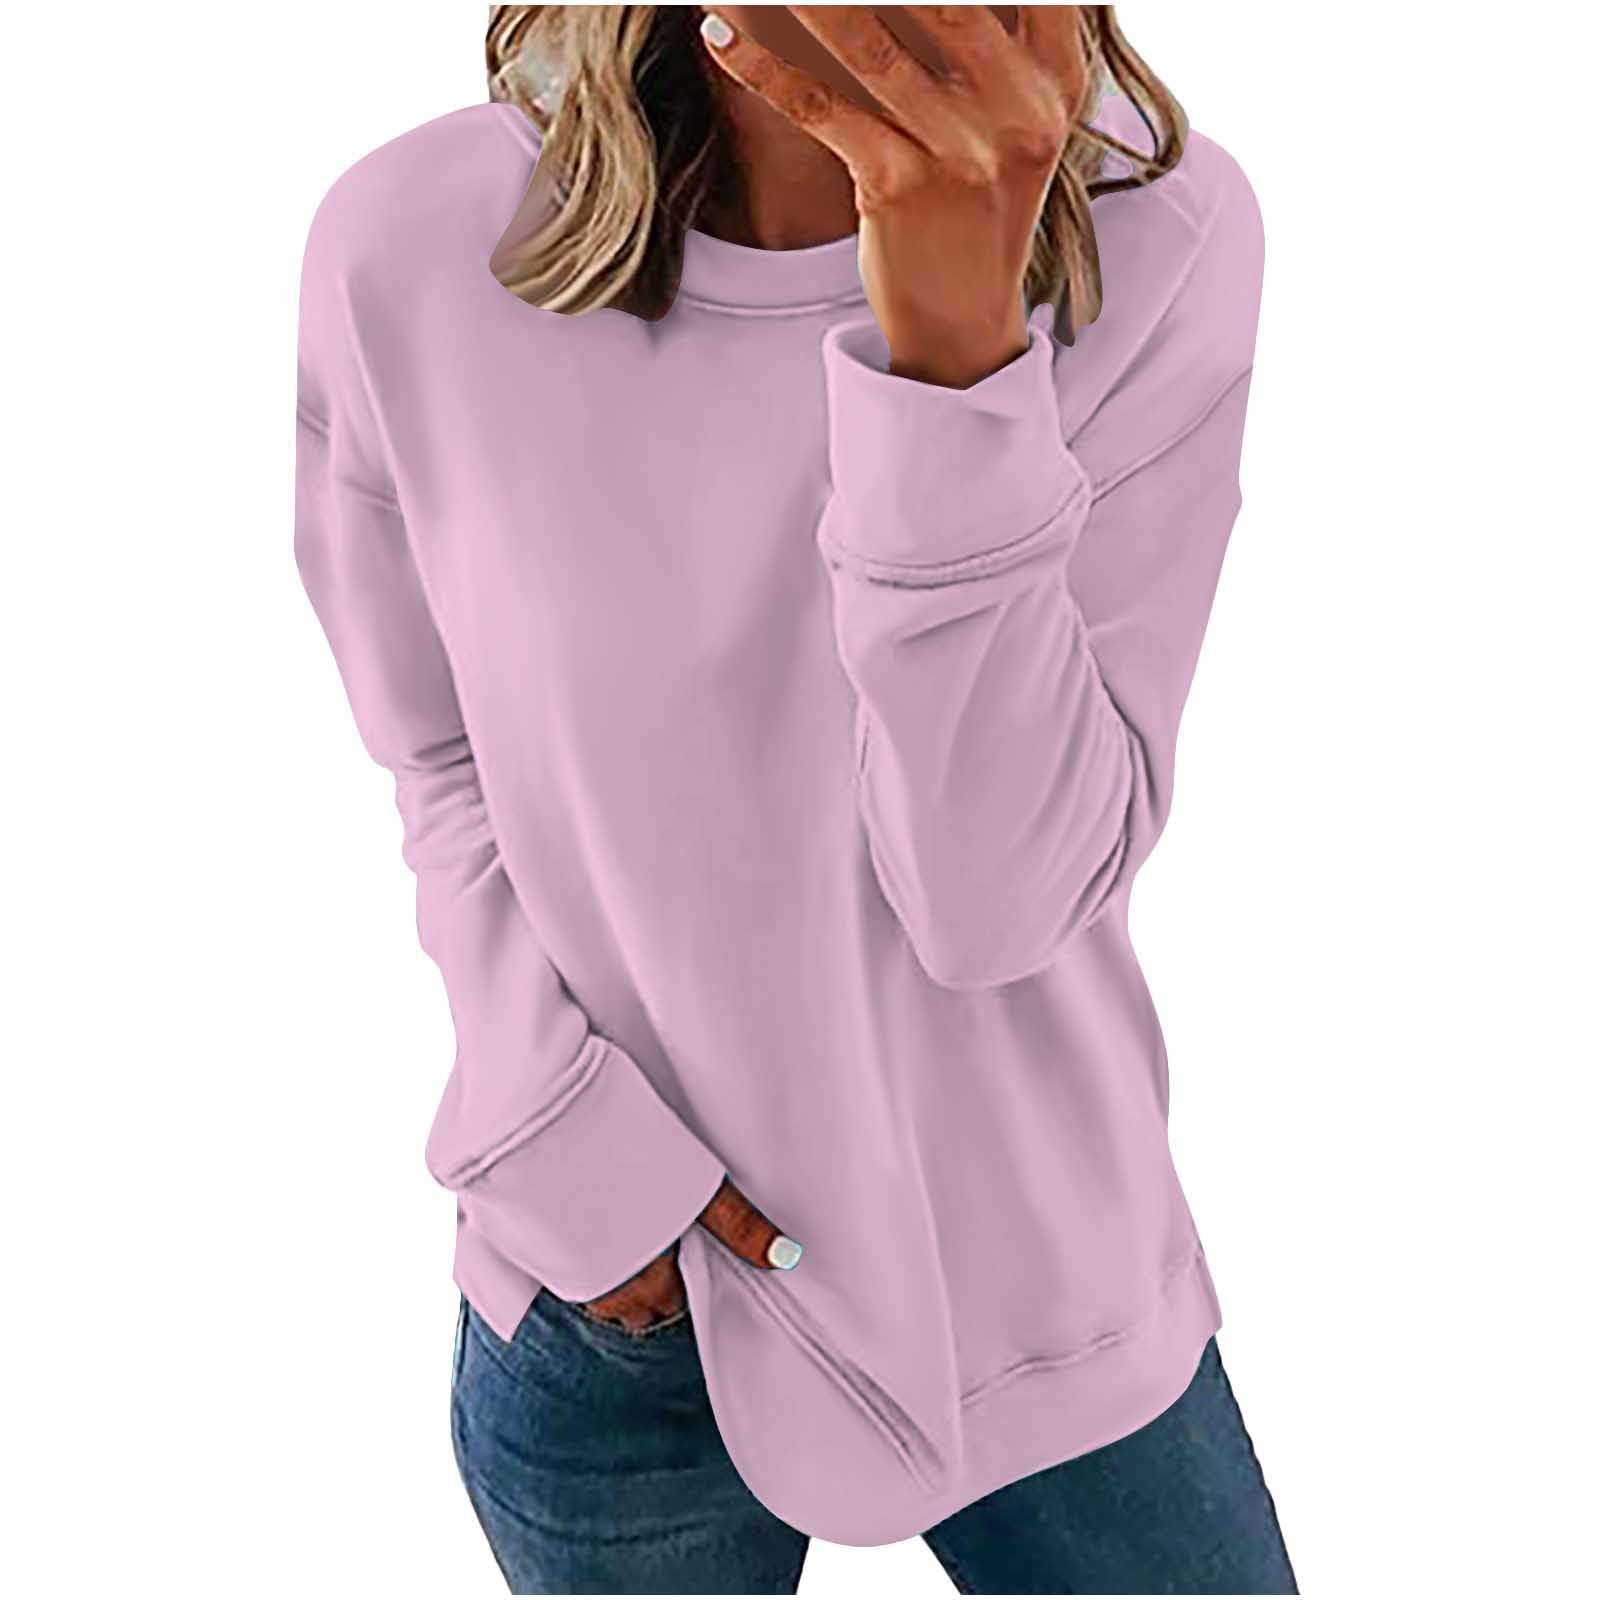 Dyegold Womens Casual Long Sleeve Sweatshirt Crewneck Pullover Tops Loose  Fit Oversized Sweaters Shirt Fall Fashion Clothes 